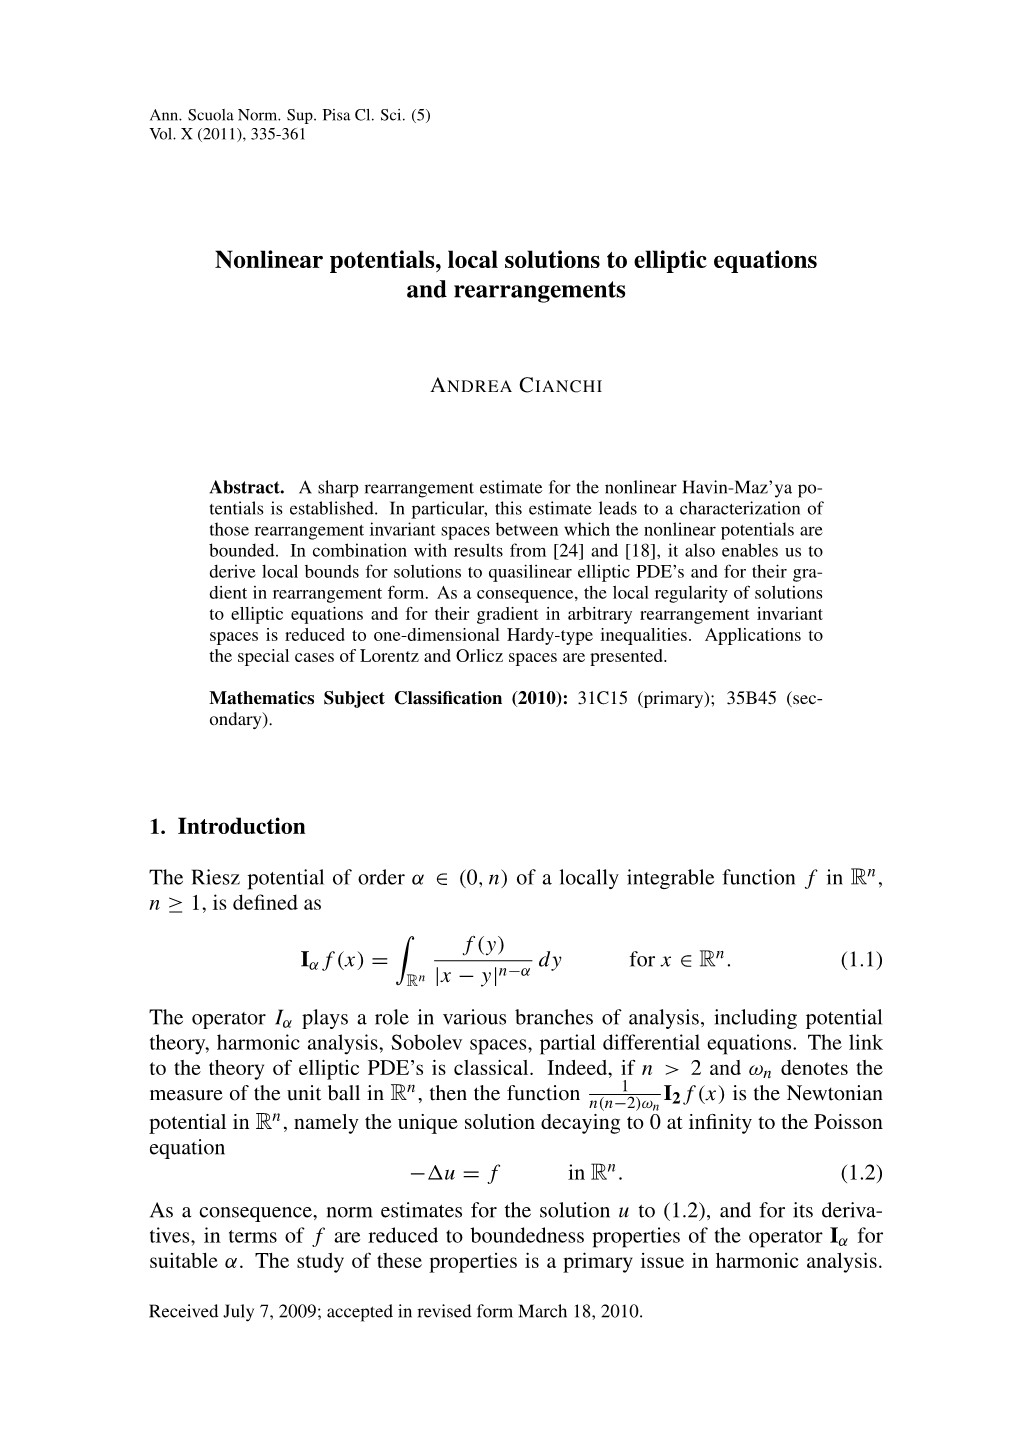 Nonlinear Potentials, Local Solutions to Elliptic Equations and Rearrangements